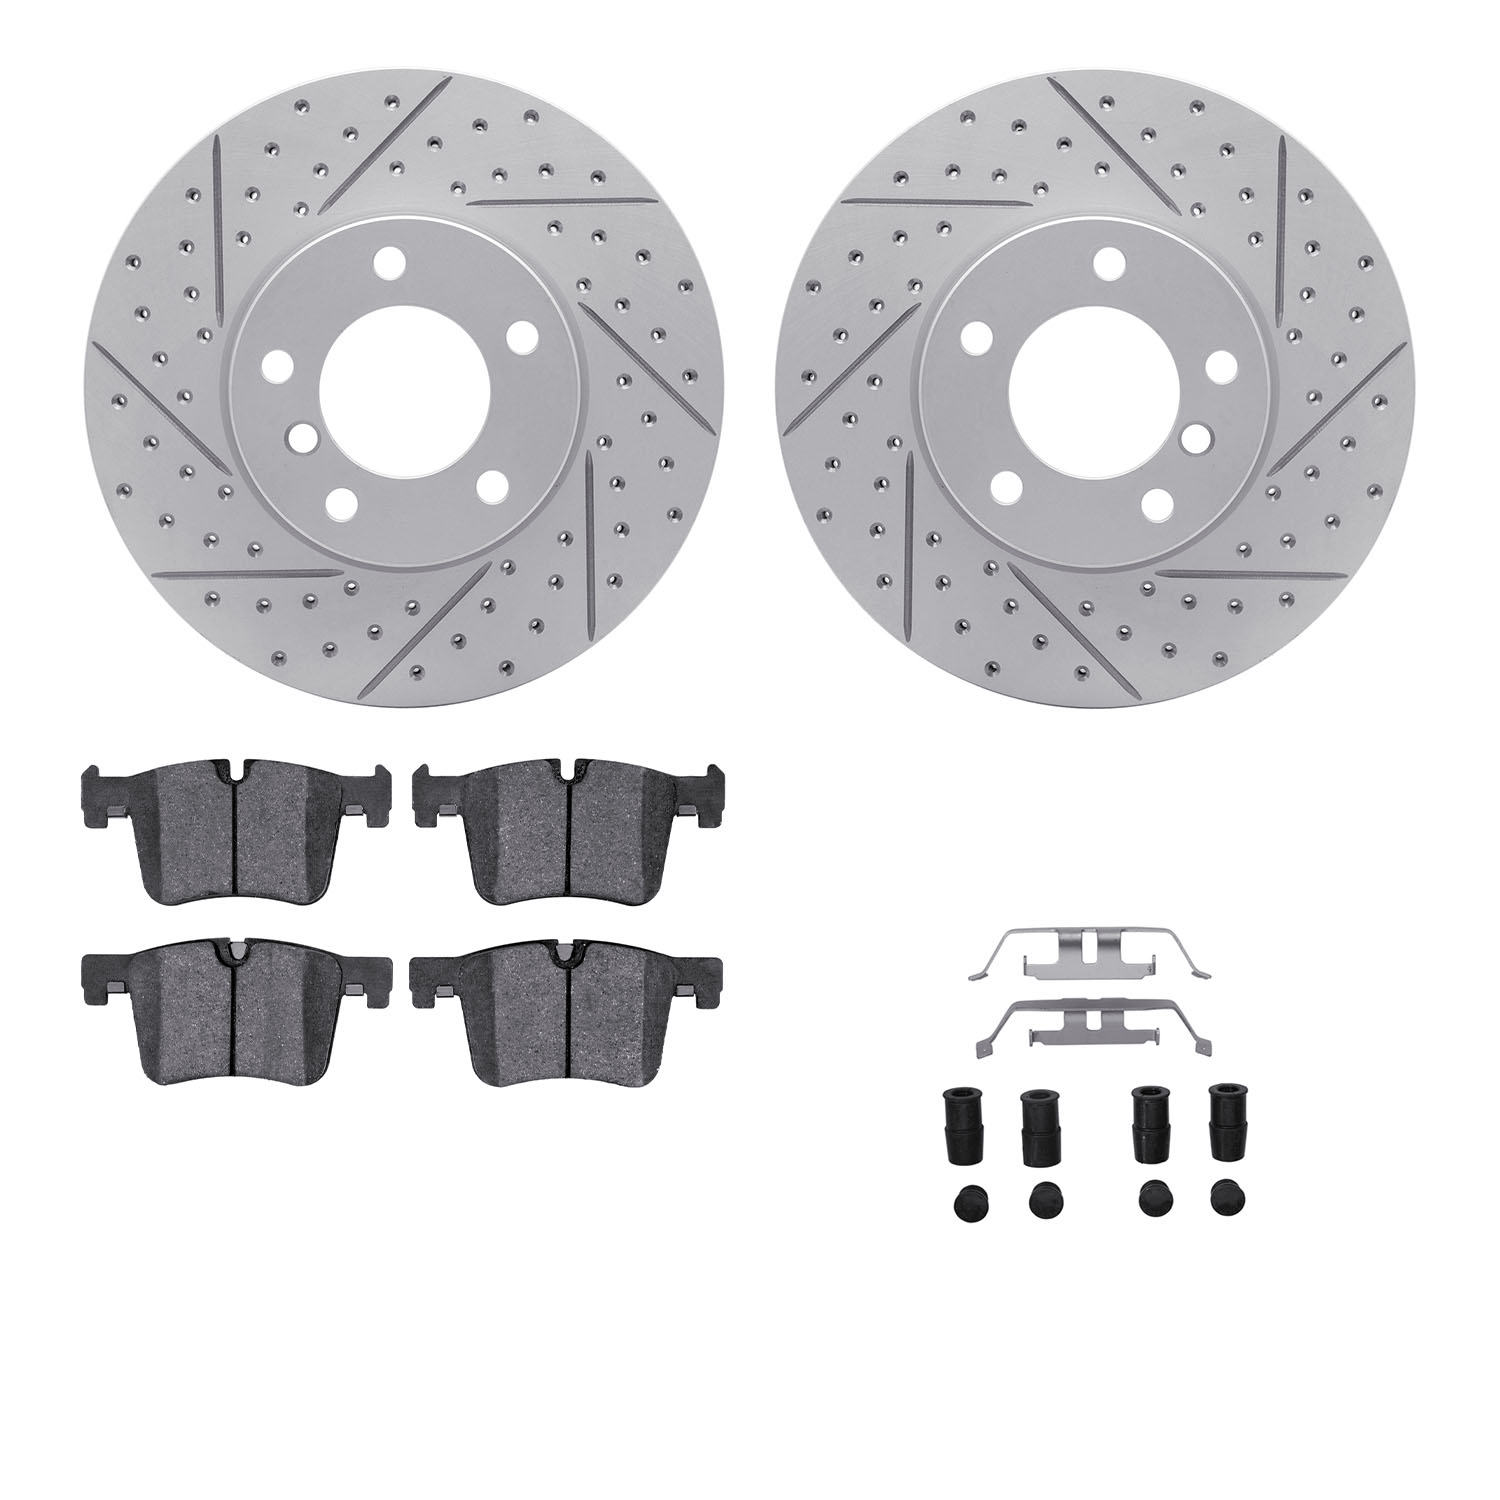 2512-31058 Geoperformance Drilled/Slotted Rotors w/5000 Advanced Brake Pads Kit & Hardware, 2013-2013 BMW, Position: Front